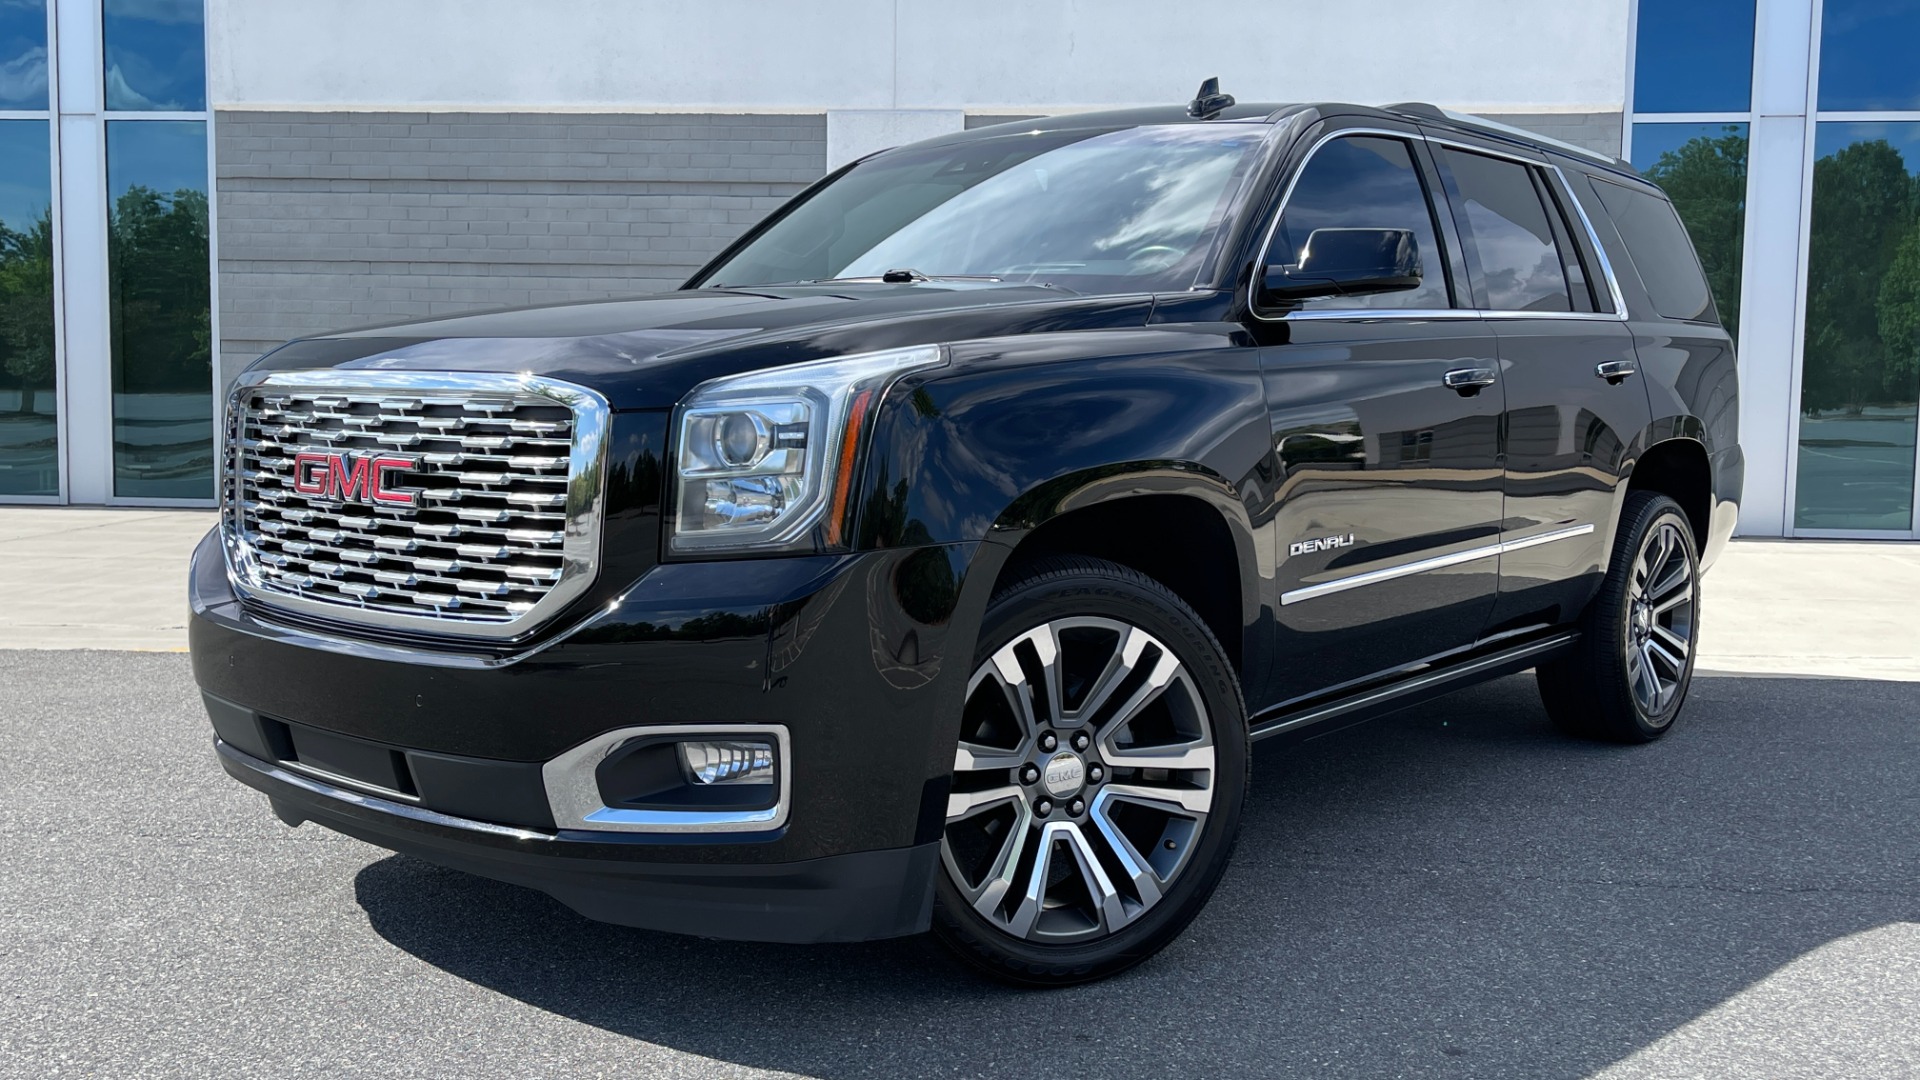 Used 2019 GMC Yukon DENALI / ULTIMATE PACKAGE / DVD / 4X4 / ADAPTIVE CRUISE / SUNROOF for sale $58,295 at Formula Imports in Charlotte NC 28227 44